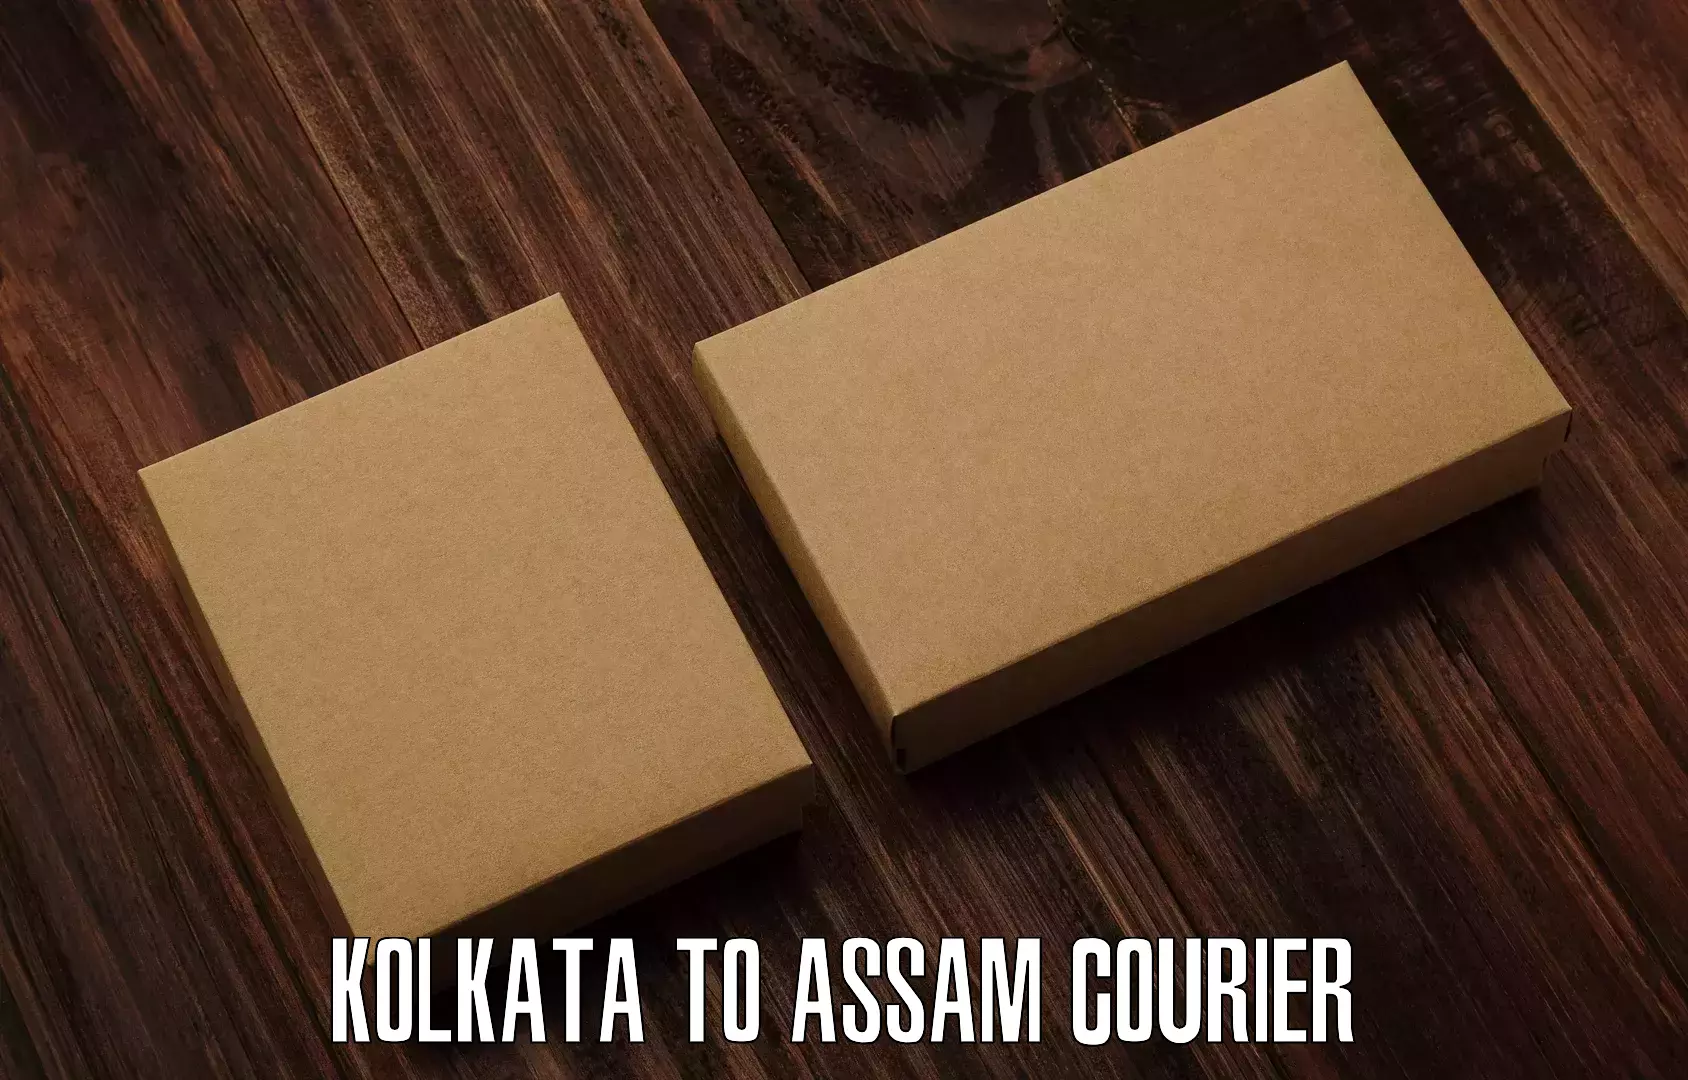 User-friendly delivery service Kolkata to Cachar